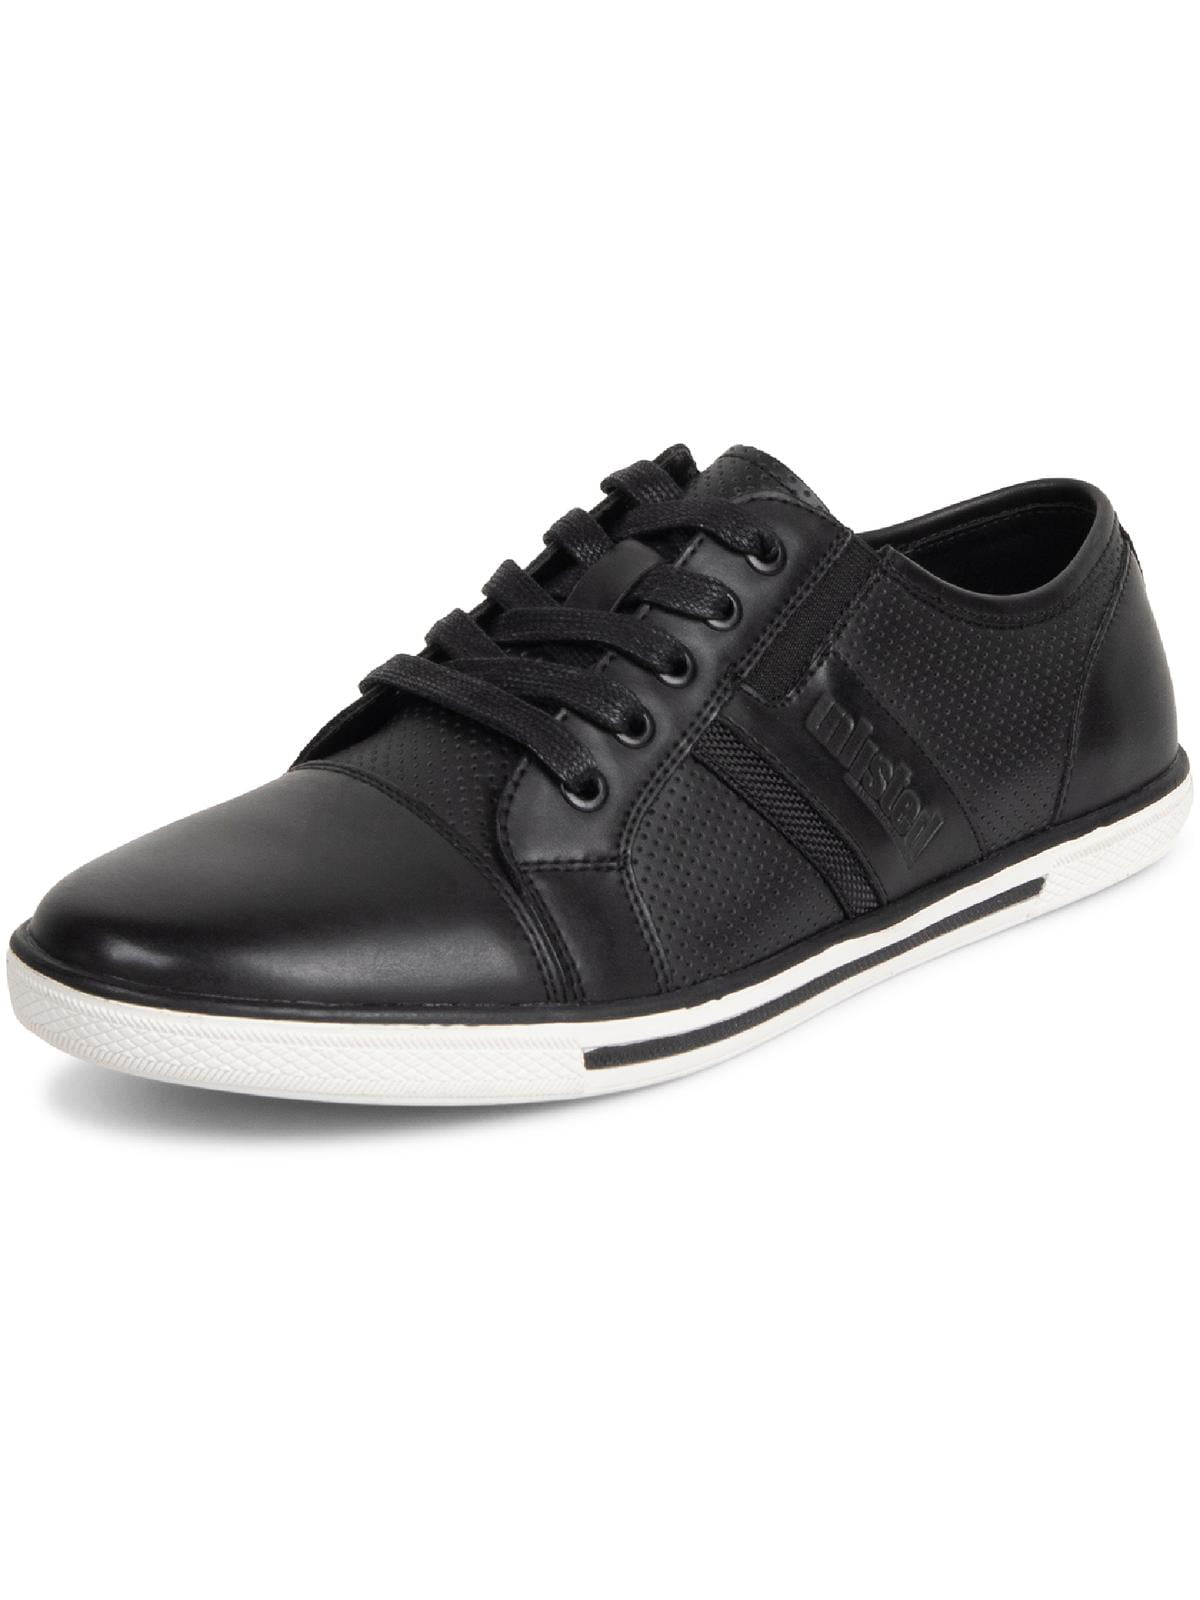 Fundament Scrupulous Bloodstained Kenneth Cole Men's Unlisted Shiny Crown Faux Leather Sneakers - Walmart.com